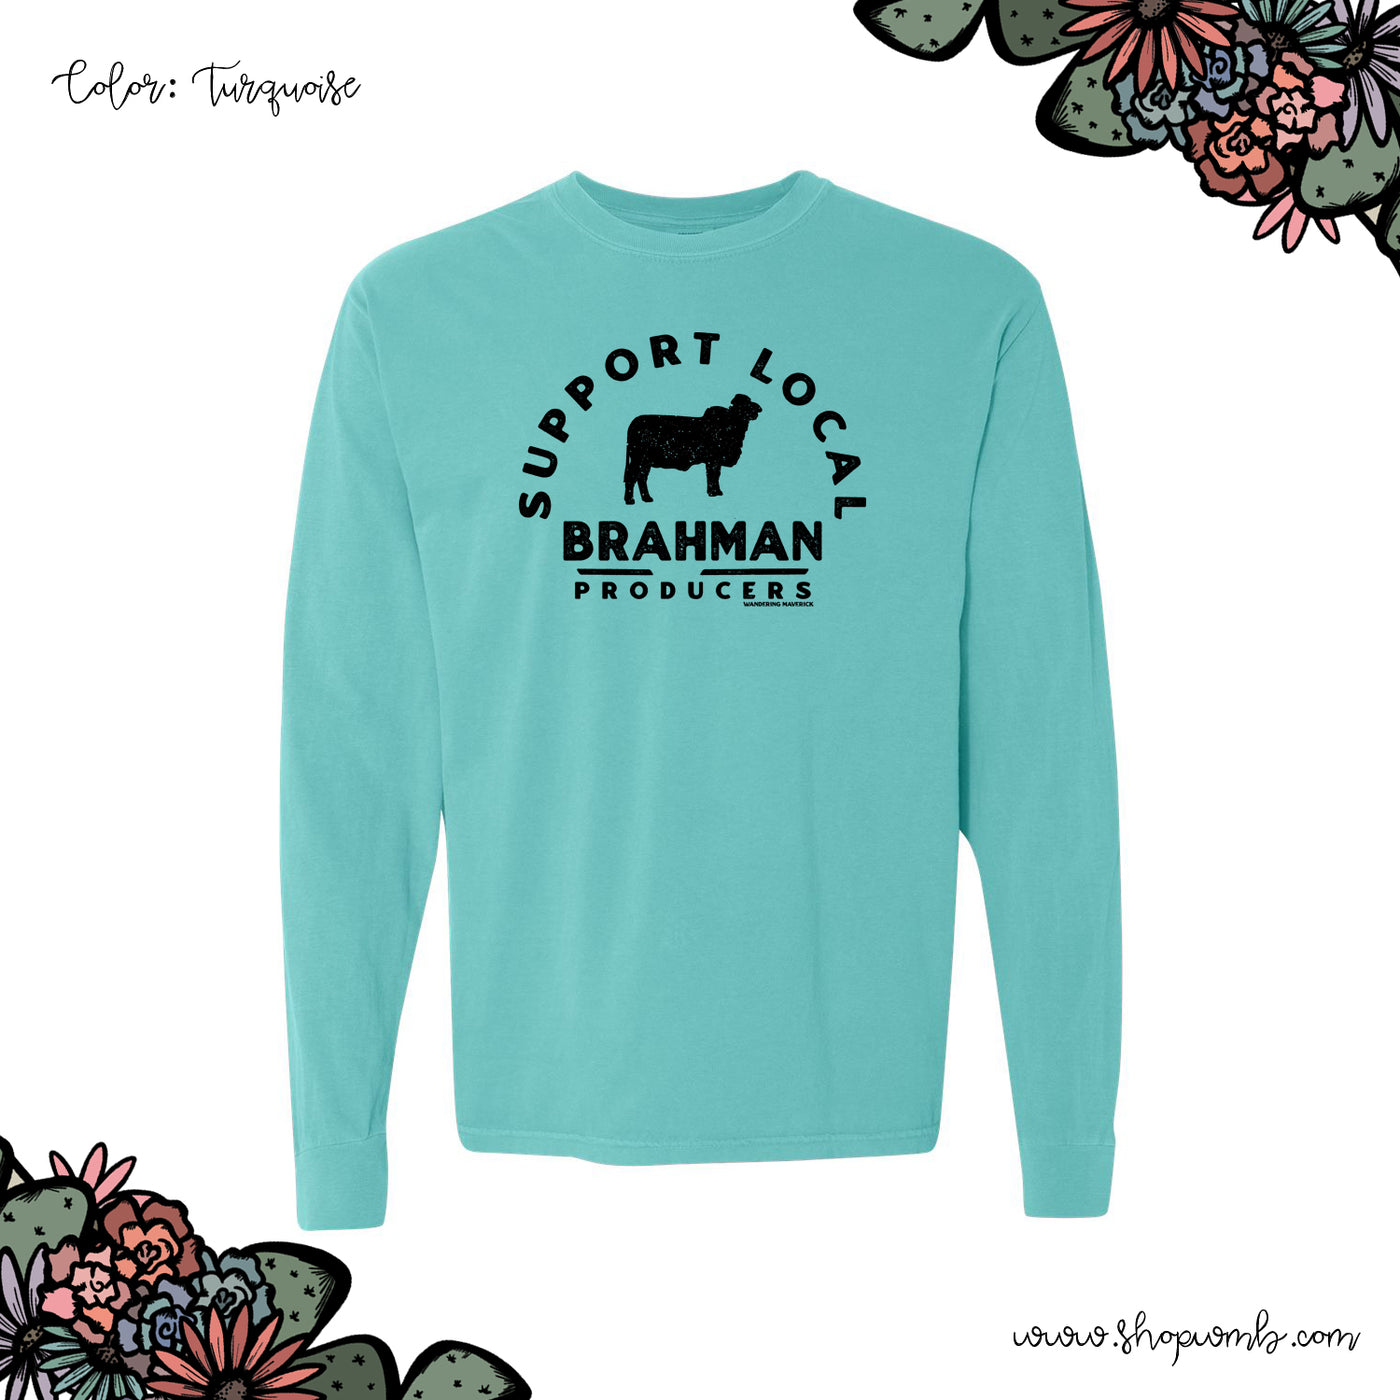 Support Local Brahman Producers LONG SLEEVE T-Shirt (S-3XL) - Multiple Colors!